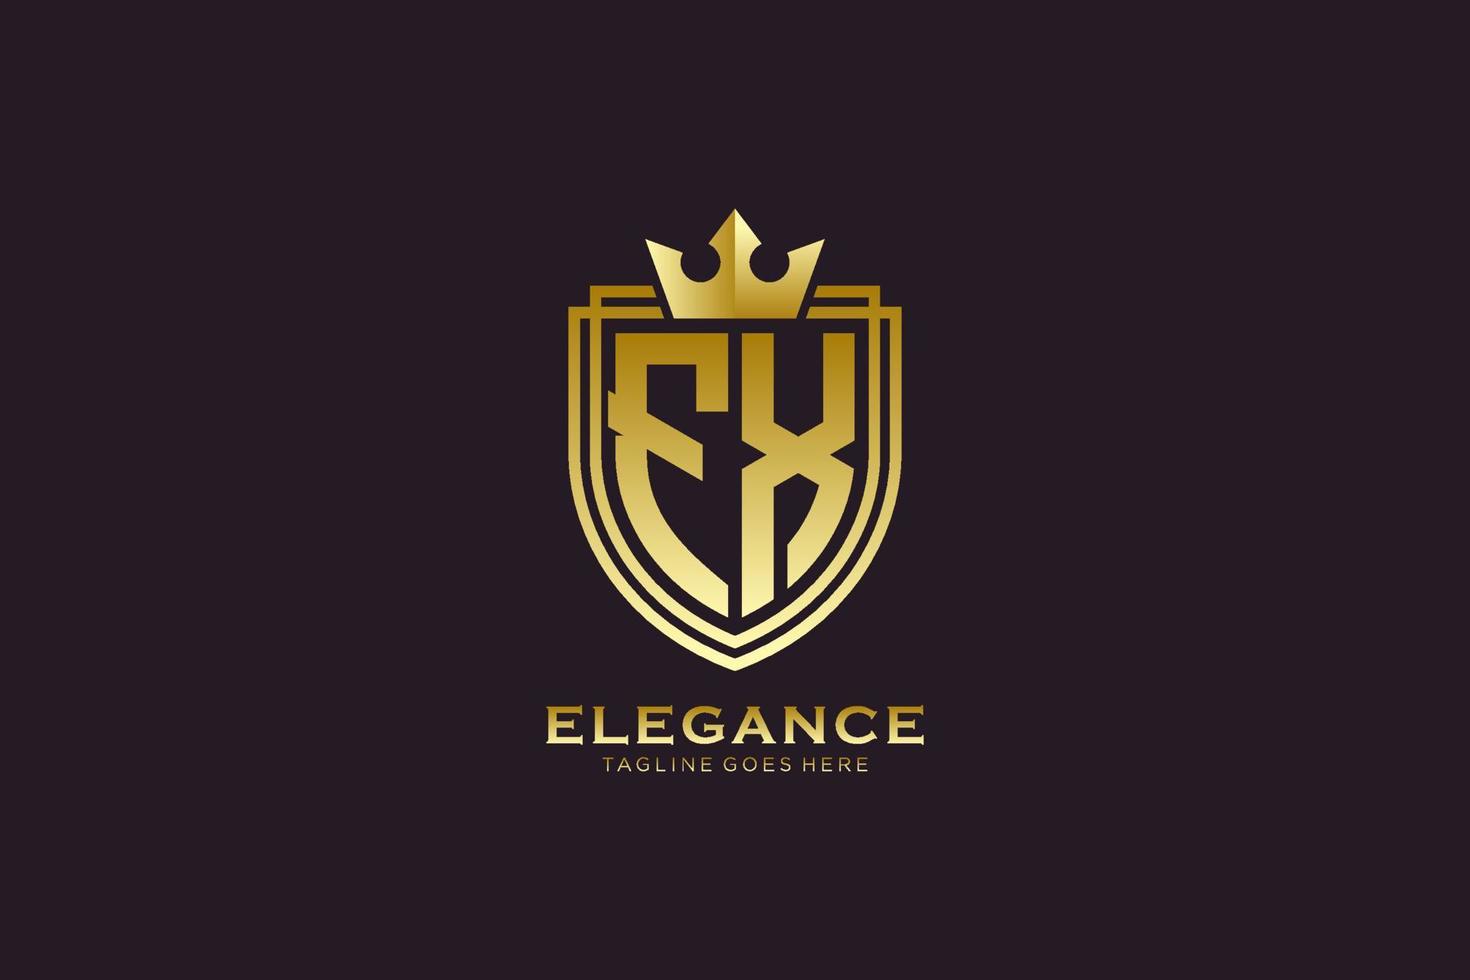 initial FX elegant luxury monogram logo or badge template with scrolls and royal crown - perfect for luxurious branding projects vector